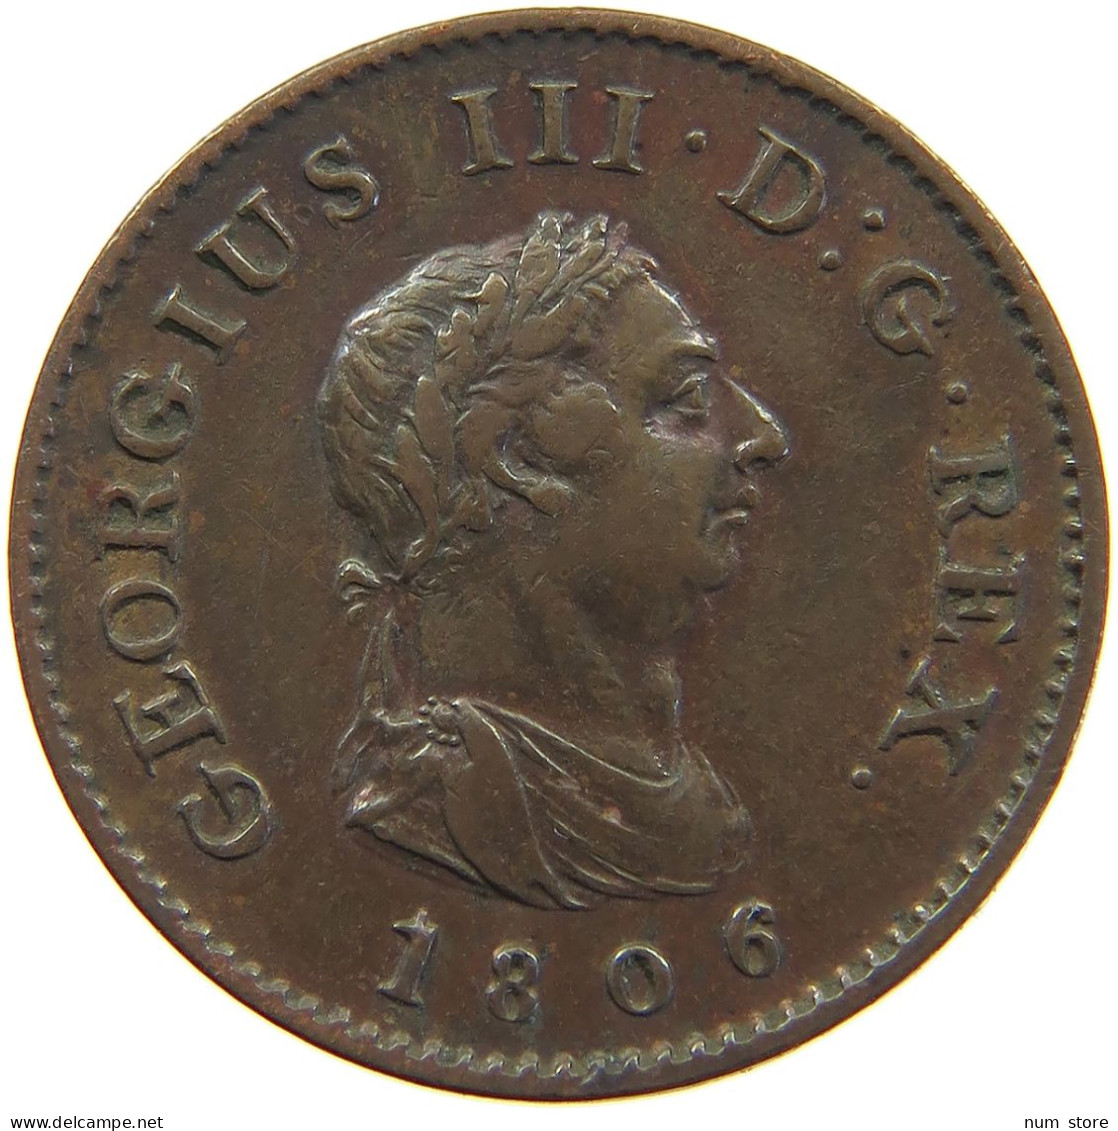 GREAT BRITAIN FARTHING 1806 GEORGE III. 1760-1820 #t001 0433 - A. 1 Farthing